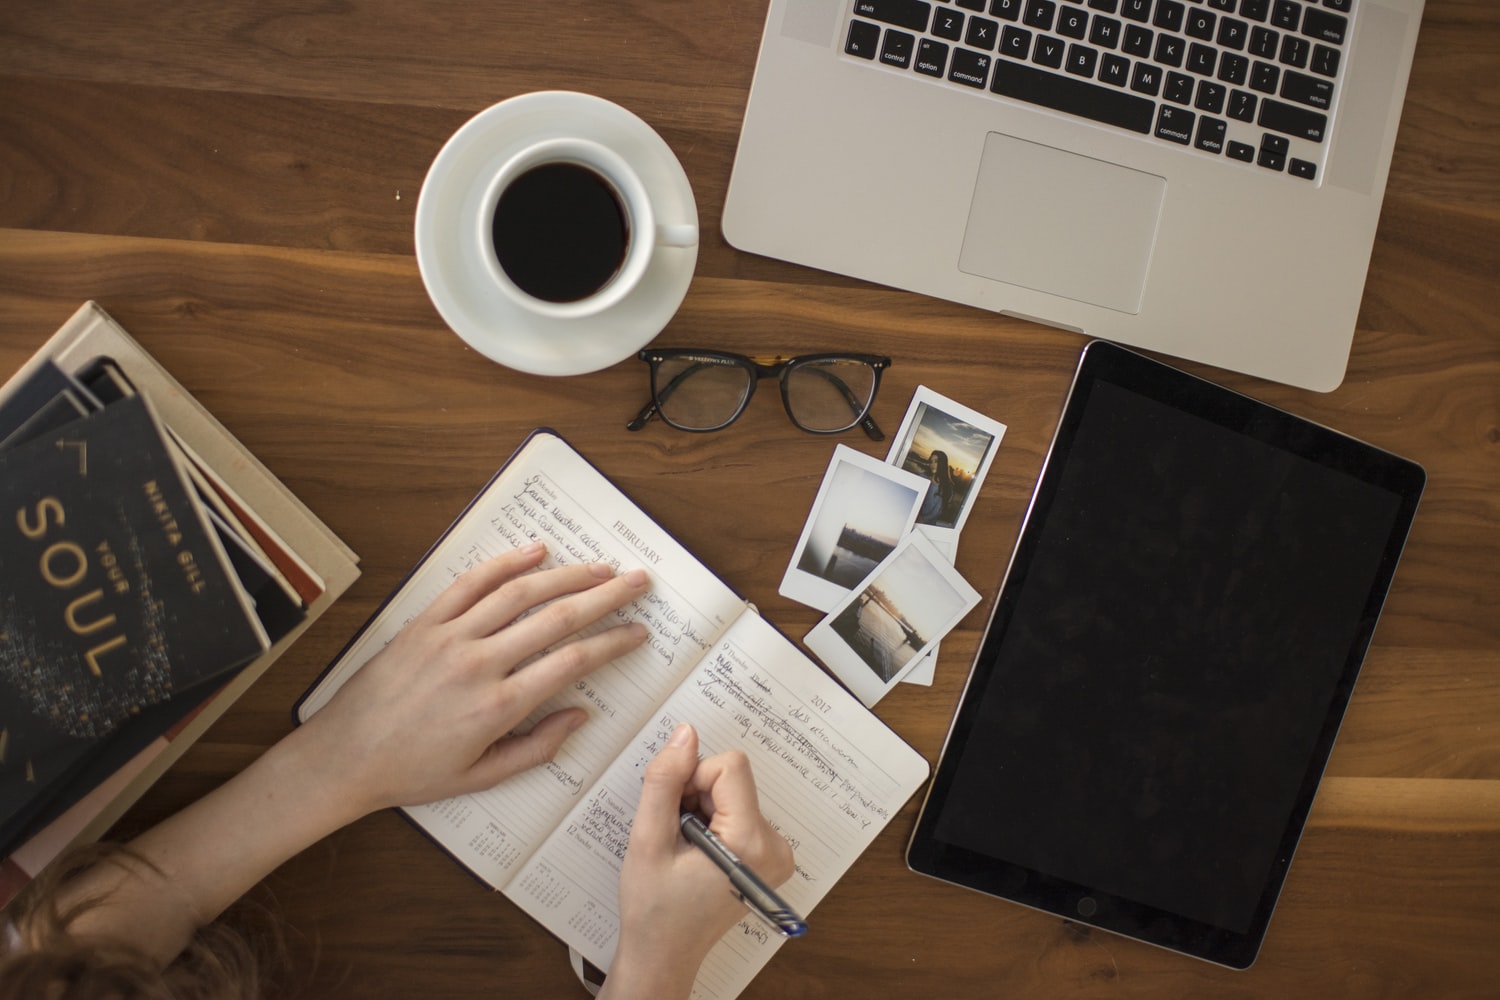 flat lay image of woman writing in notebook with coffee cup, glasses and open laptop surrounding her hands